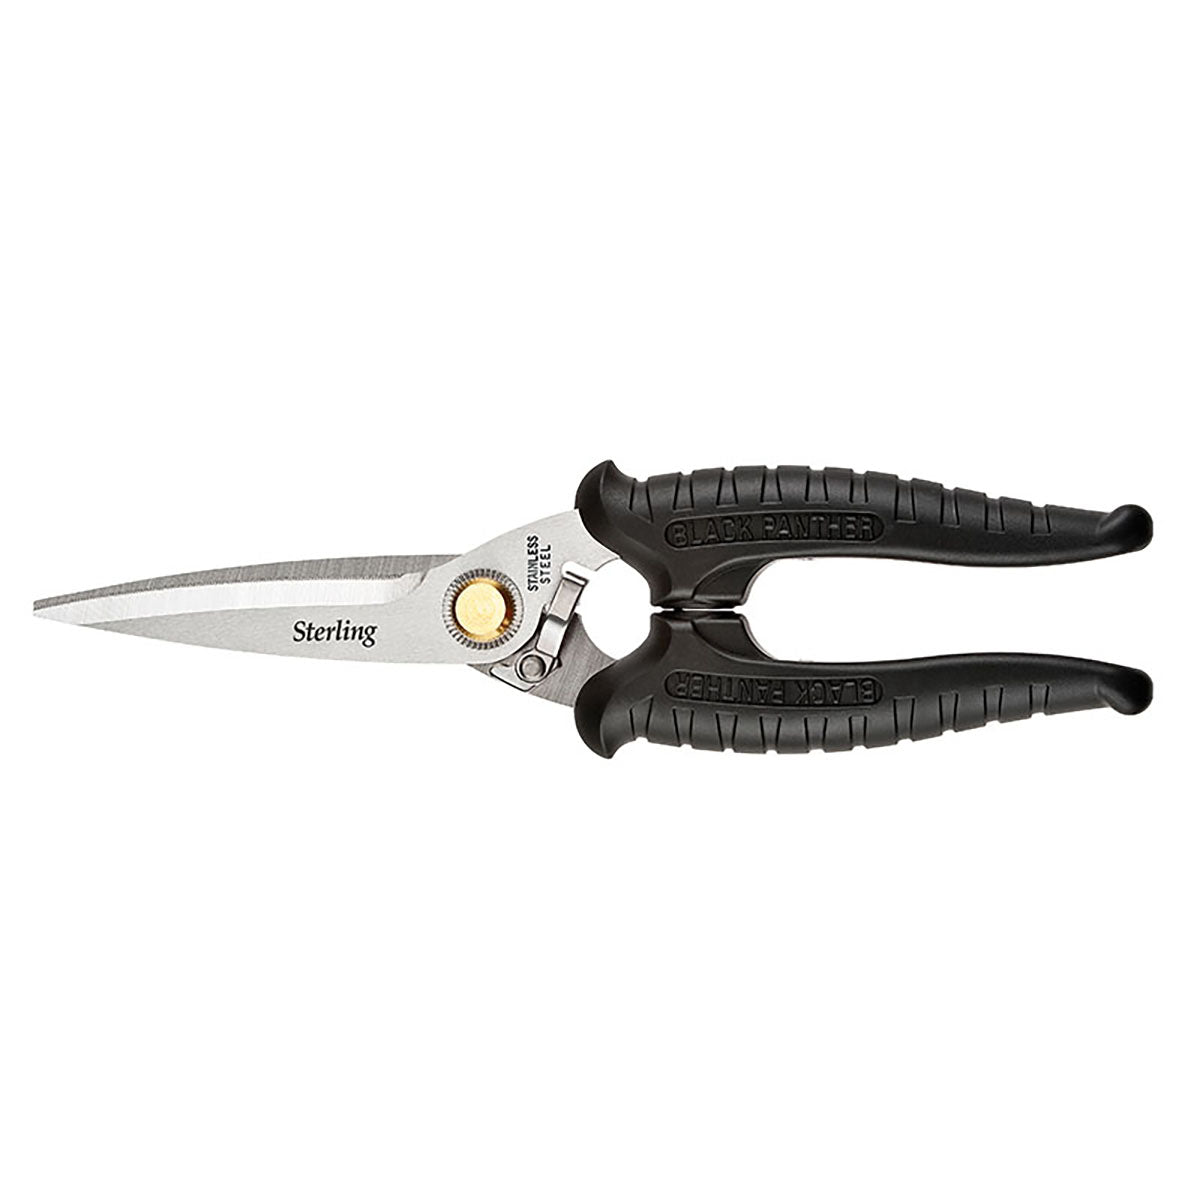 Sterling Black Panther 200mm (8") Industrial Snips-Tools - Scissors, Cutters, & Knot Tools-Sterling-Fishing Station